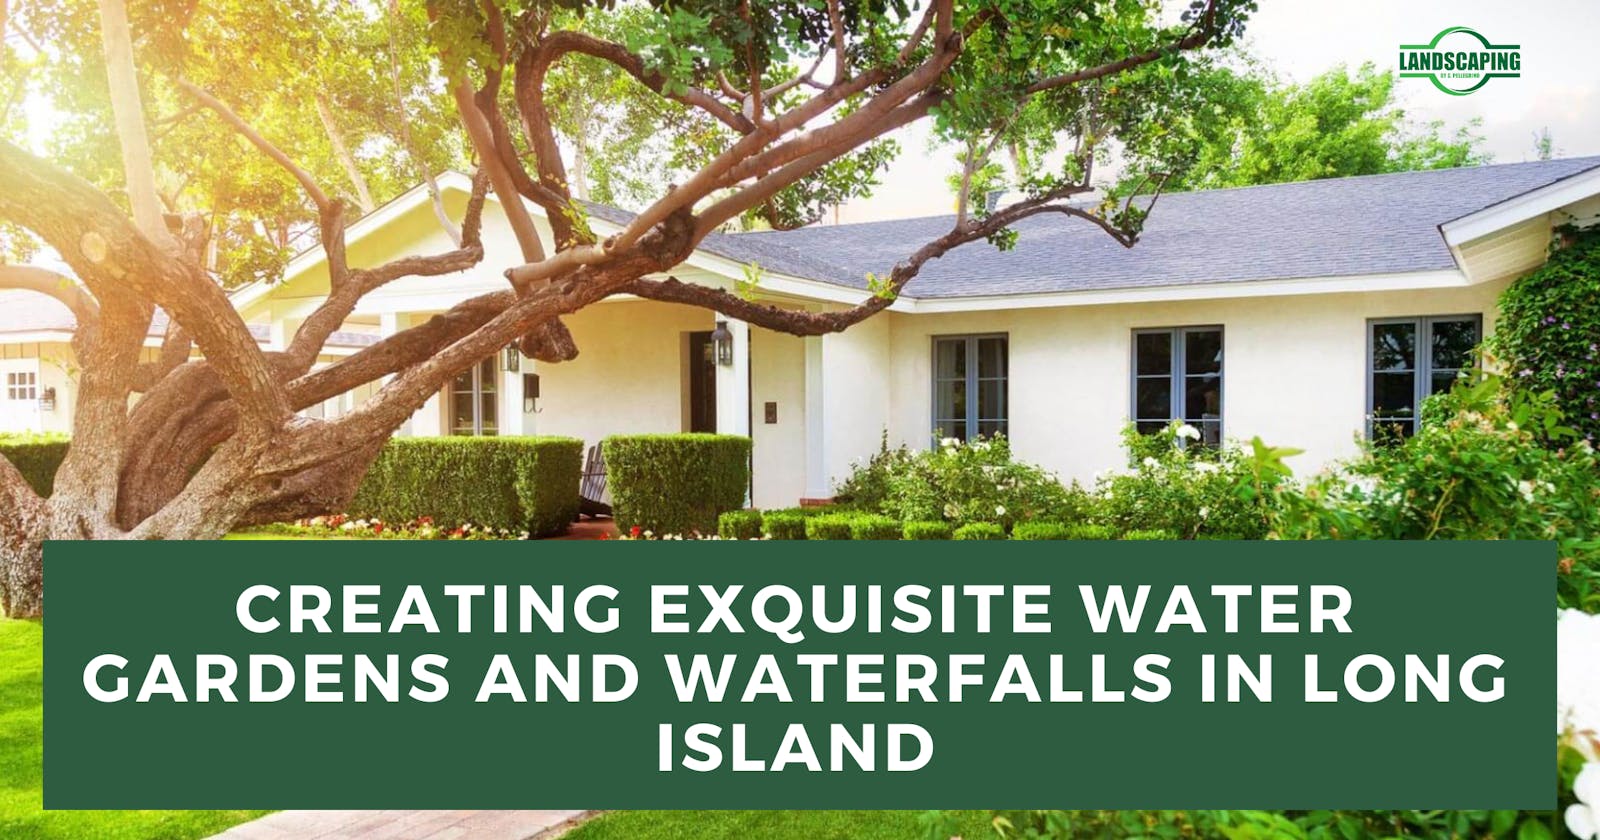 Creating Exquisite Water Gardens and Waterfalls in Long Island